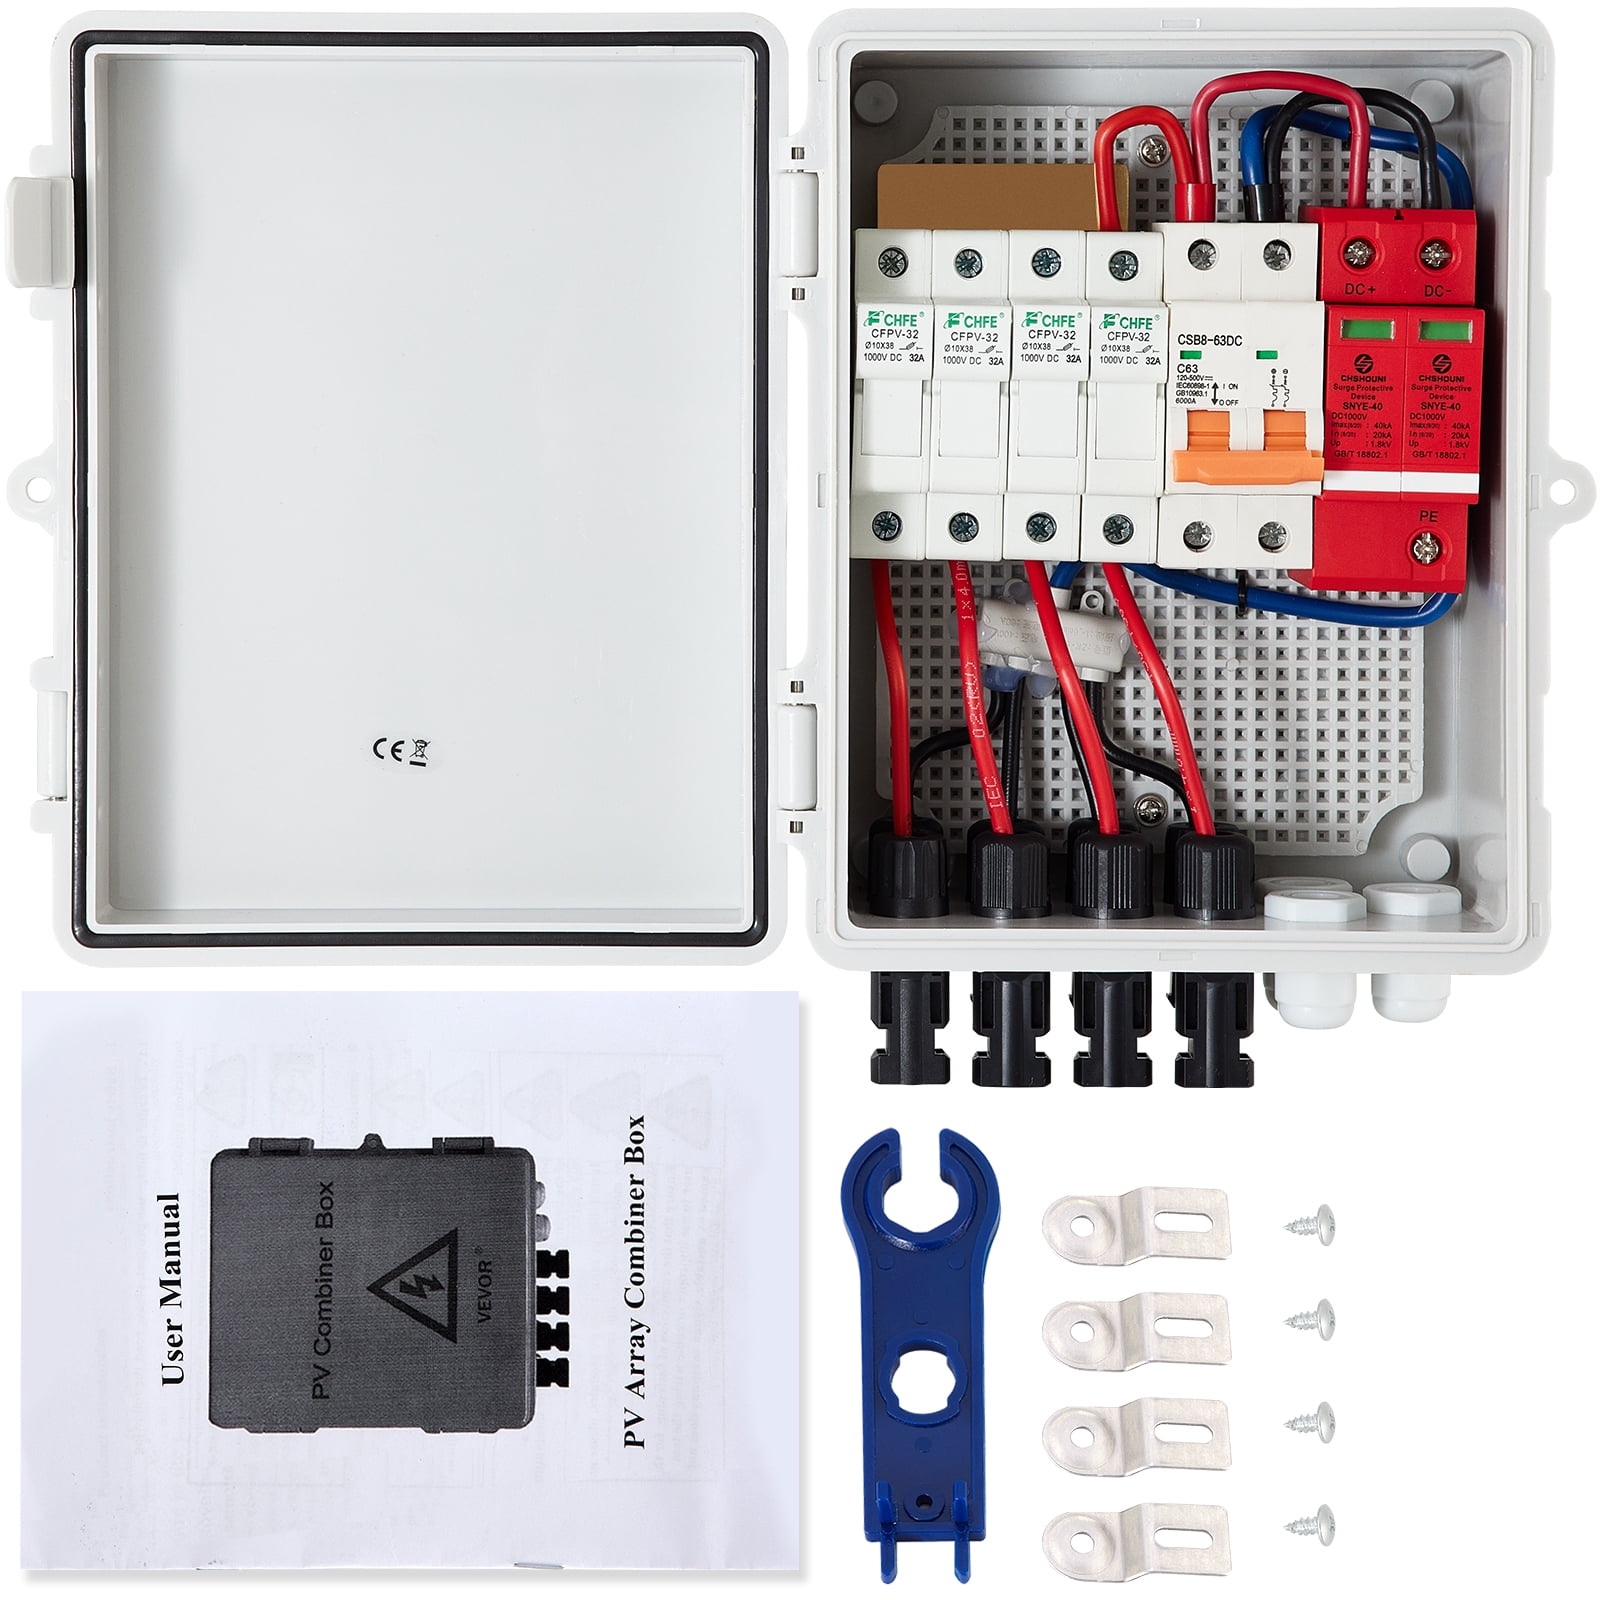 6-String Solar Combiner Box with 10A Circuit Breakers & Lightning/Surge Module 